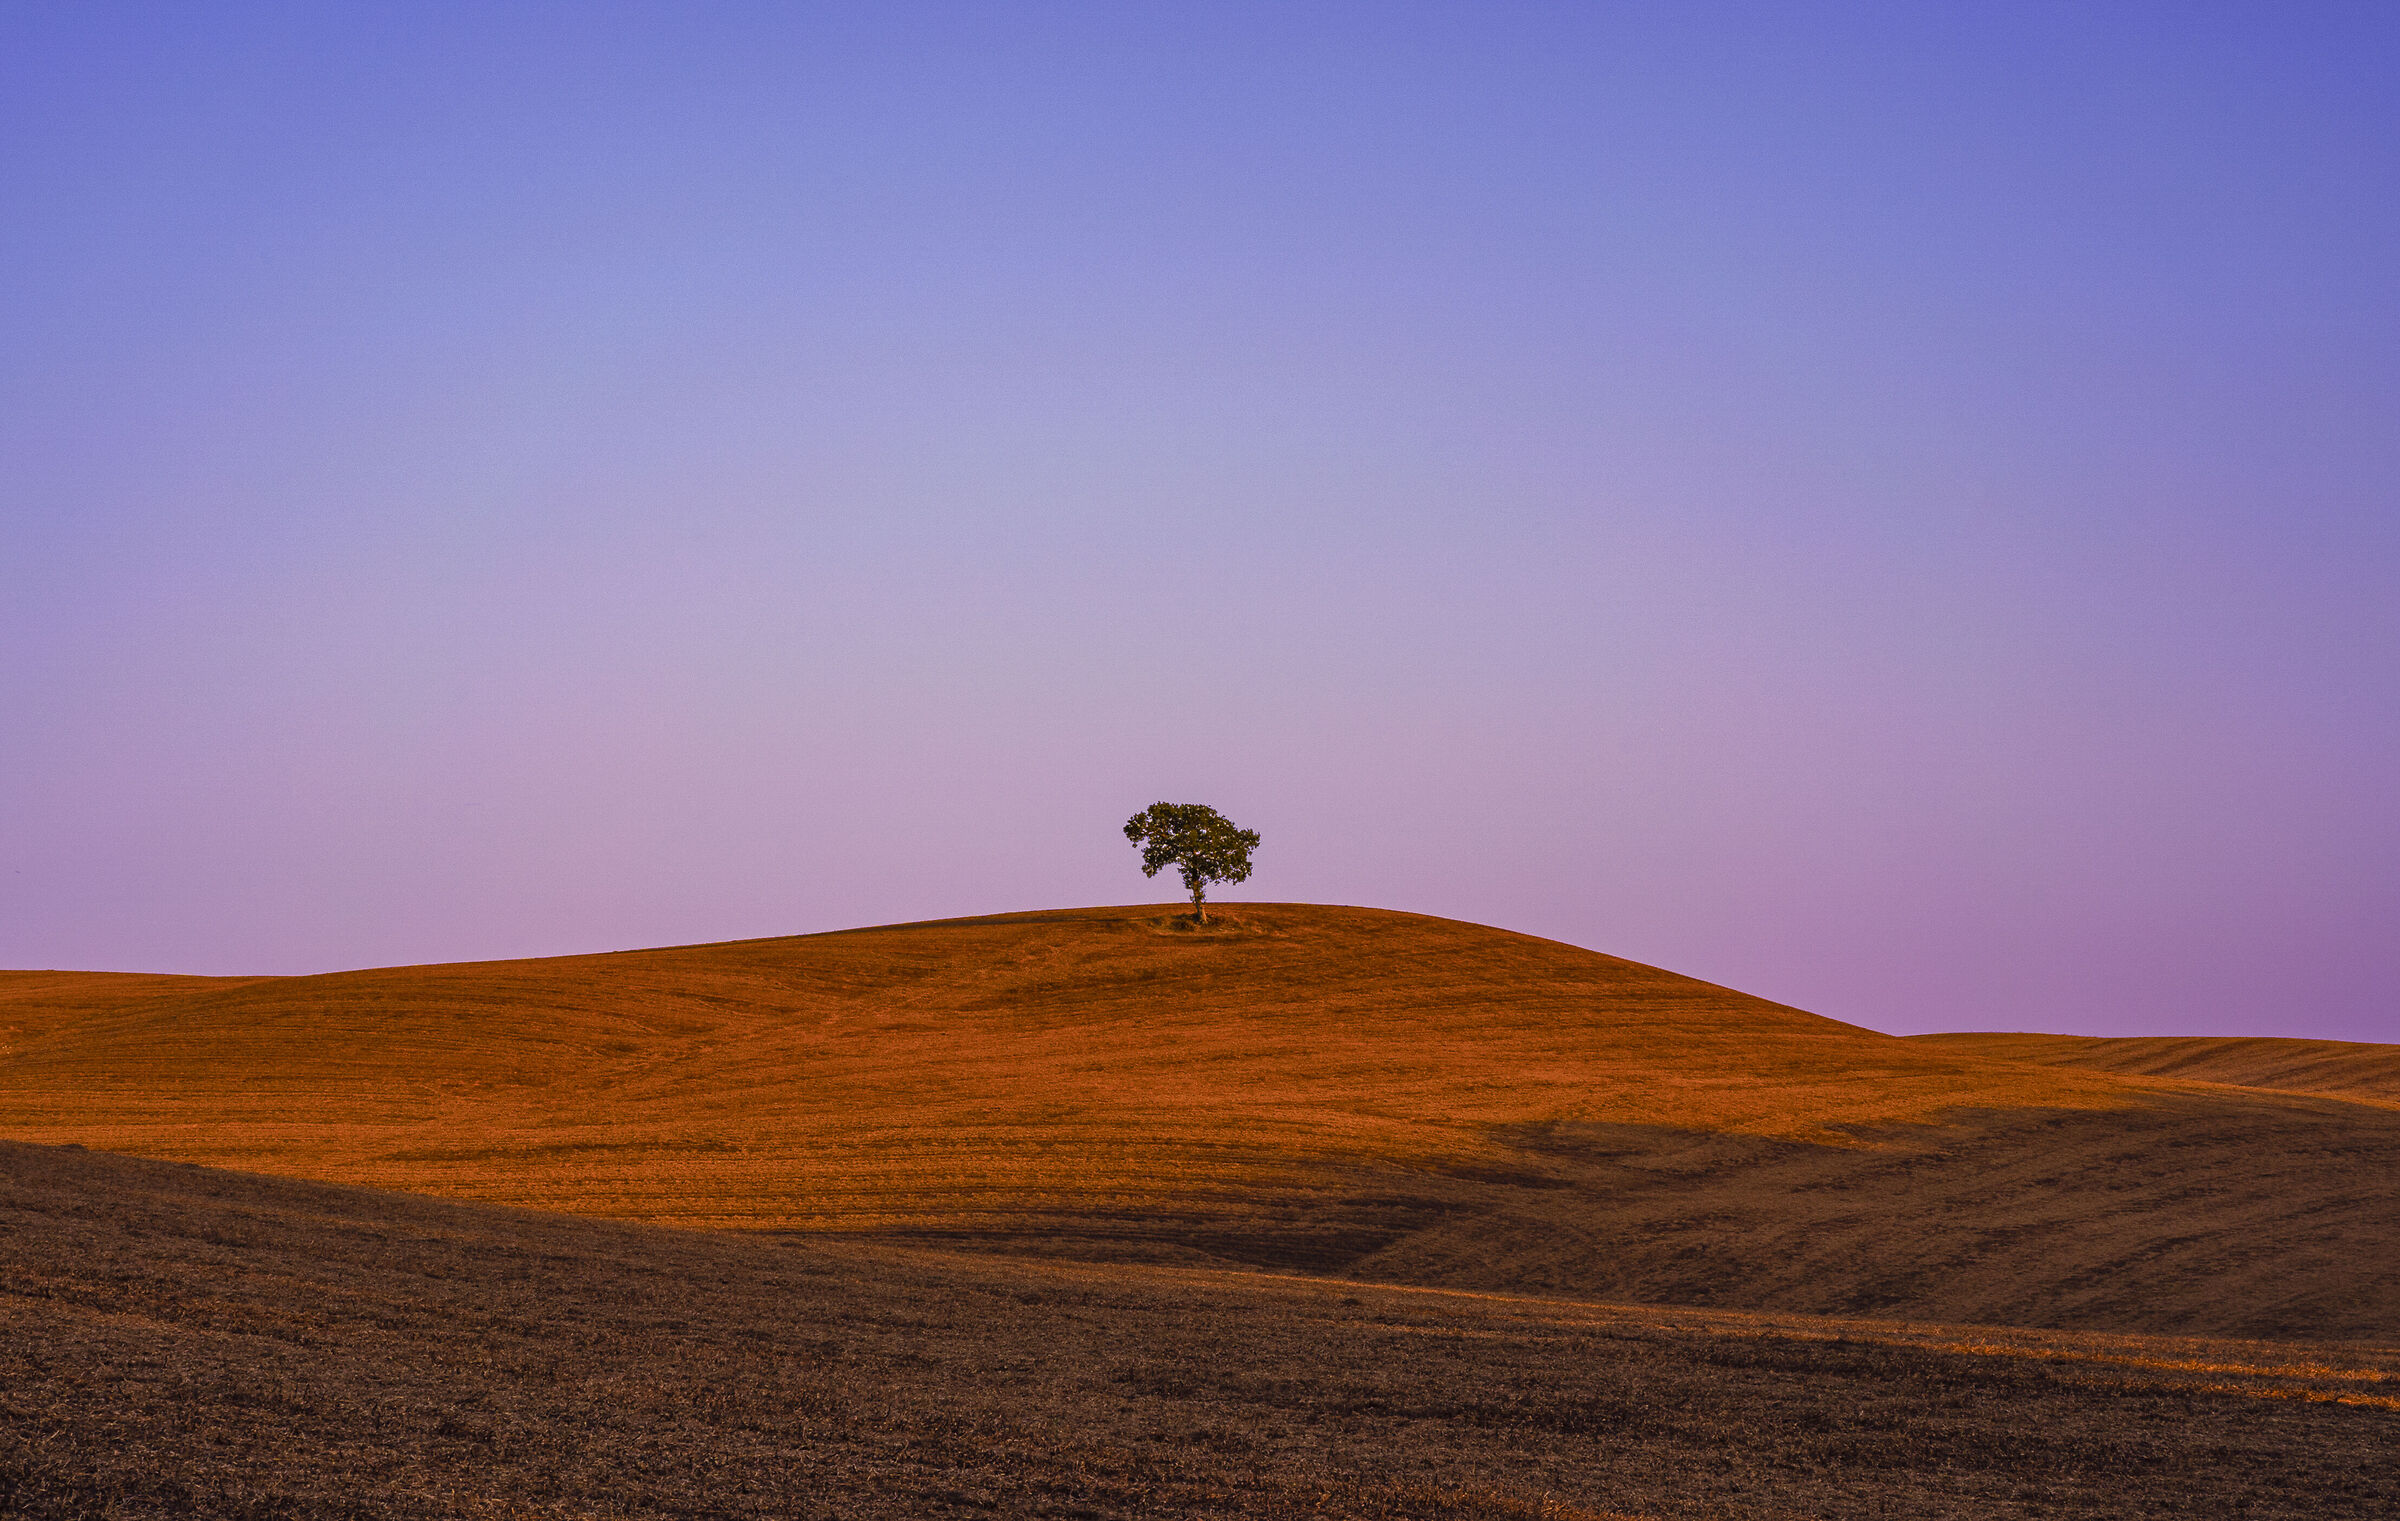 The solitude of the Tuscan desert ...